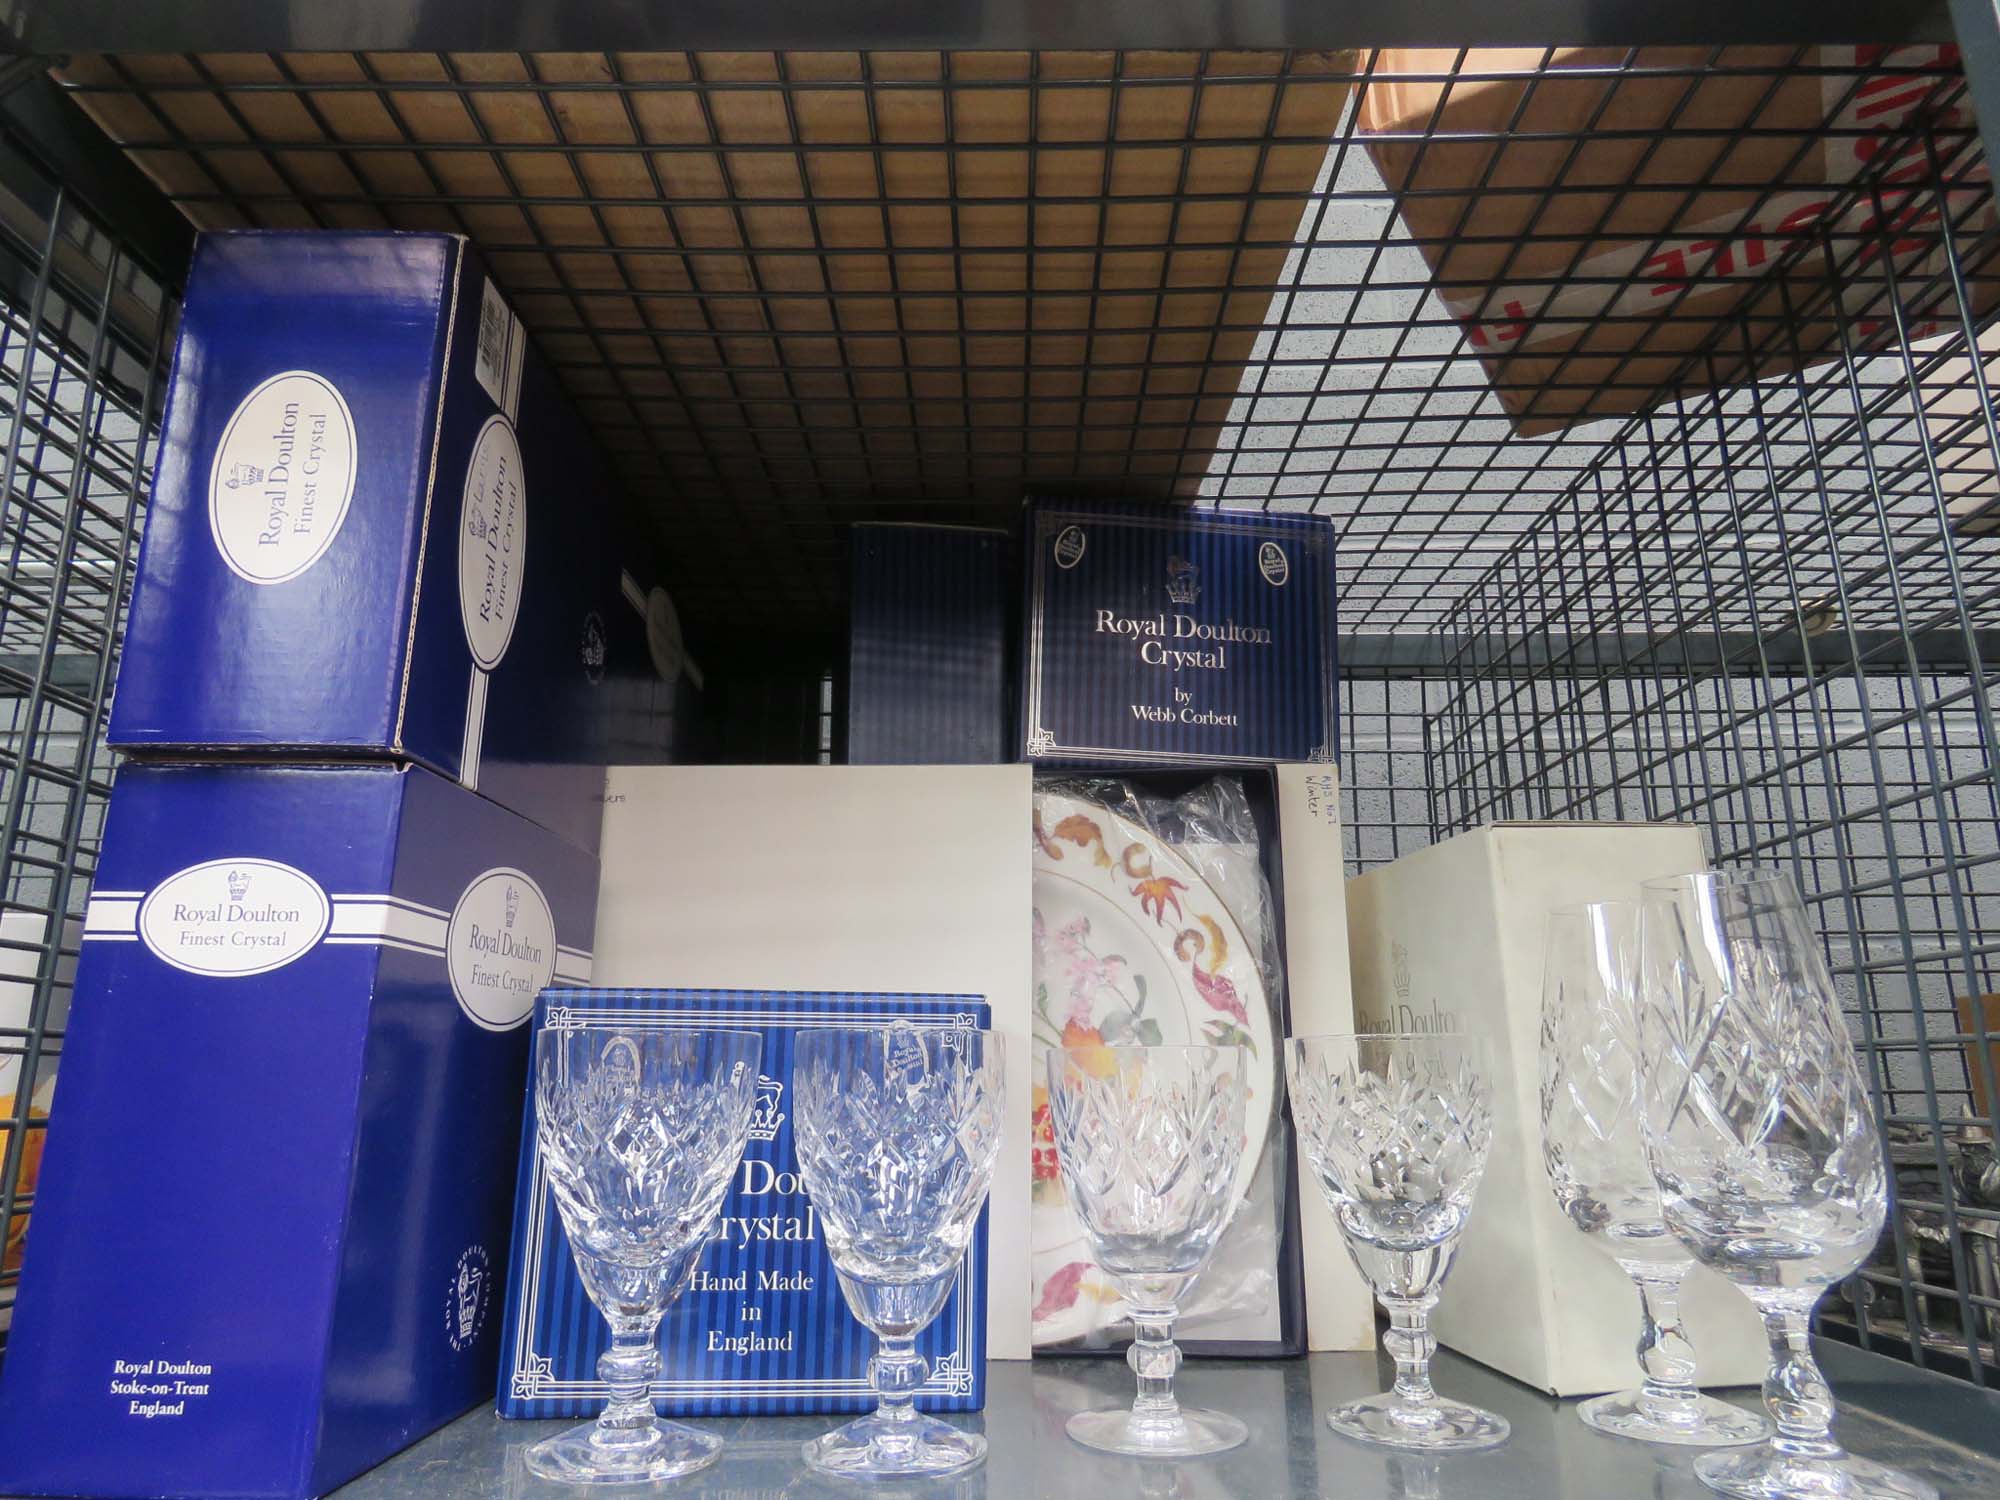 Cage containing a quantity of Royal Doulton crystal wine glasses